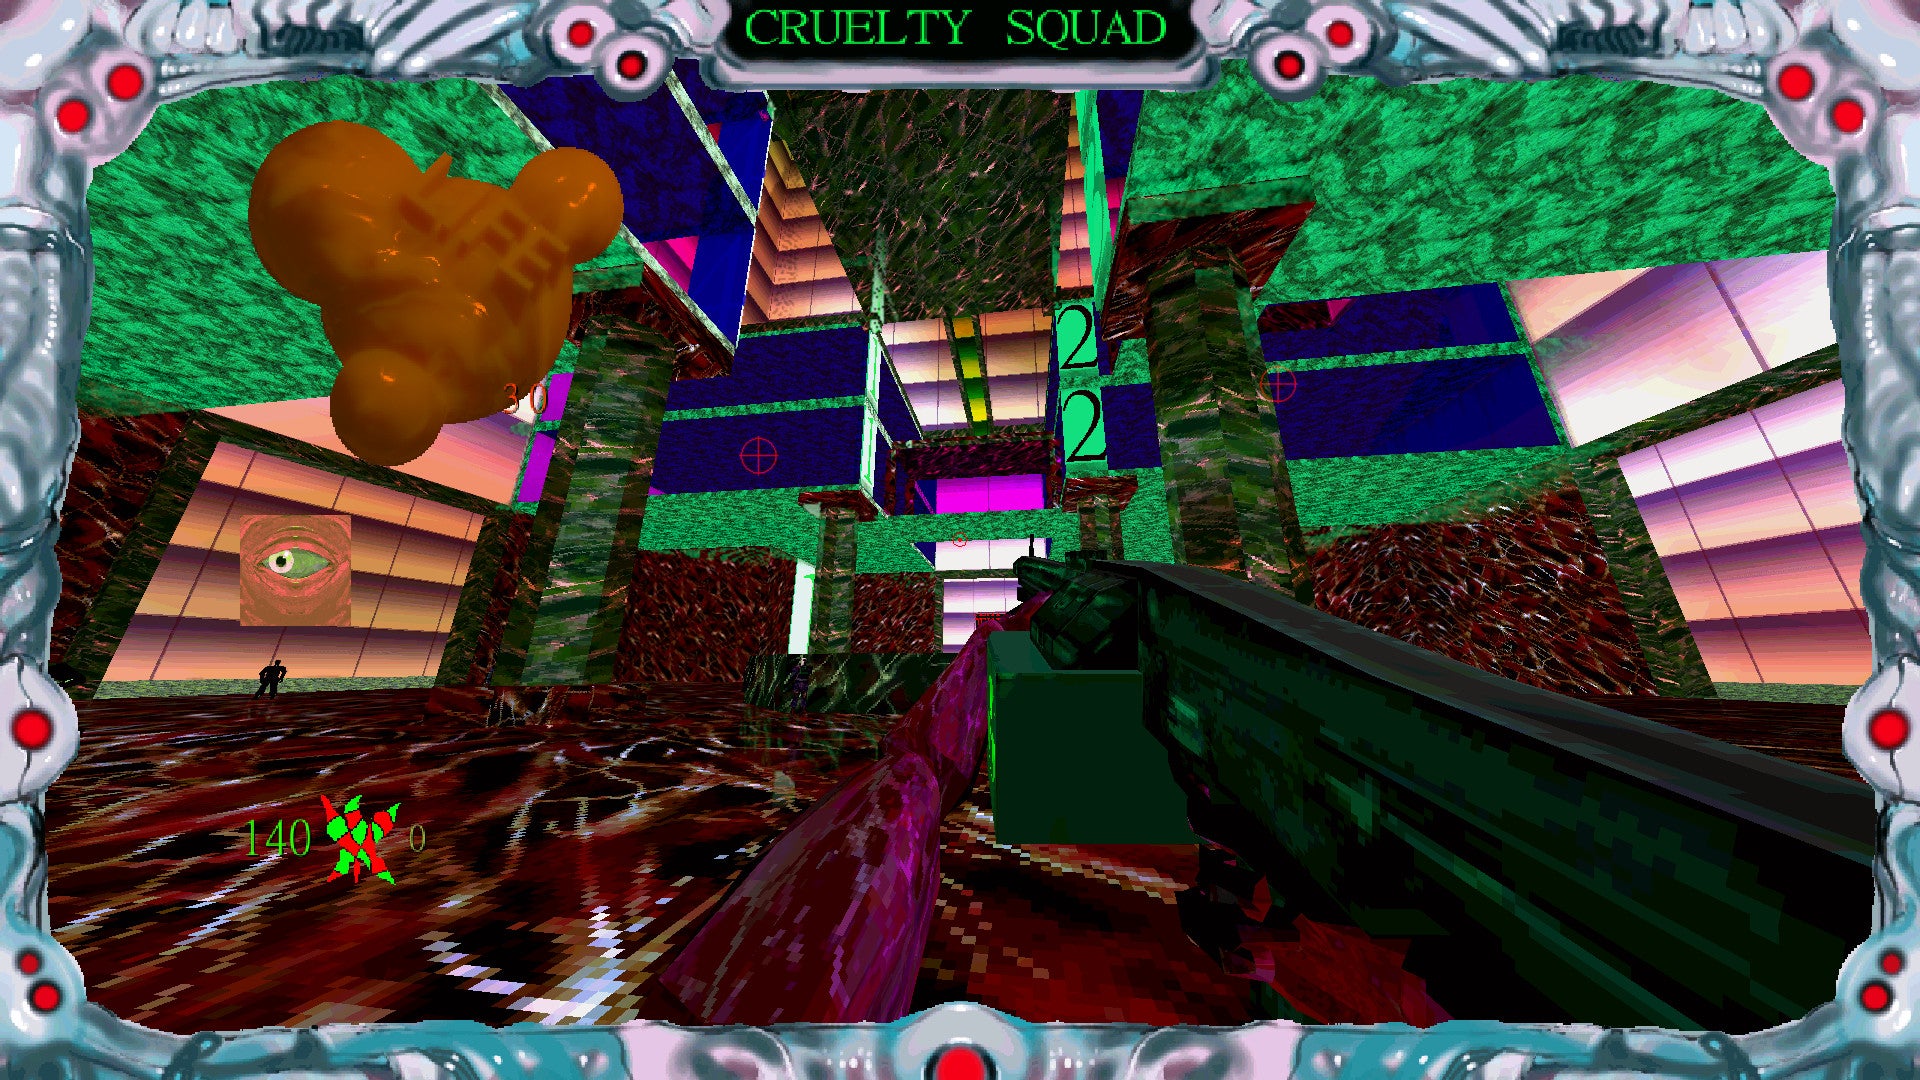 A screenshot of Cruelty Squad and hoo boy it has a lot of clashing textures.